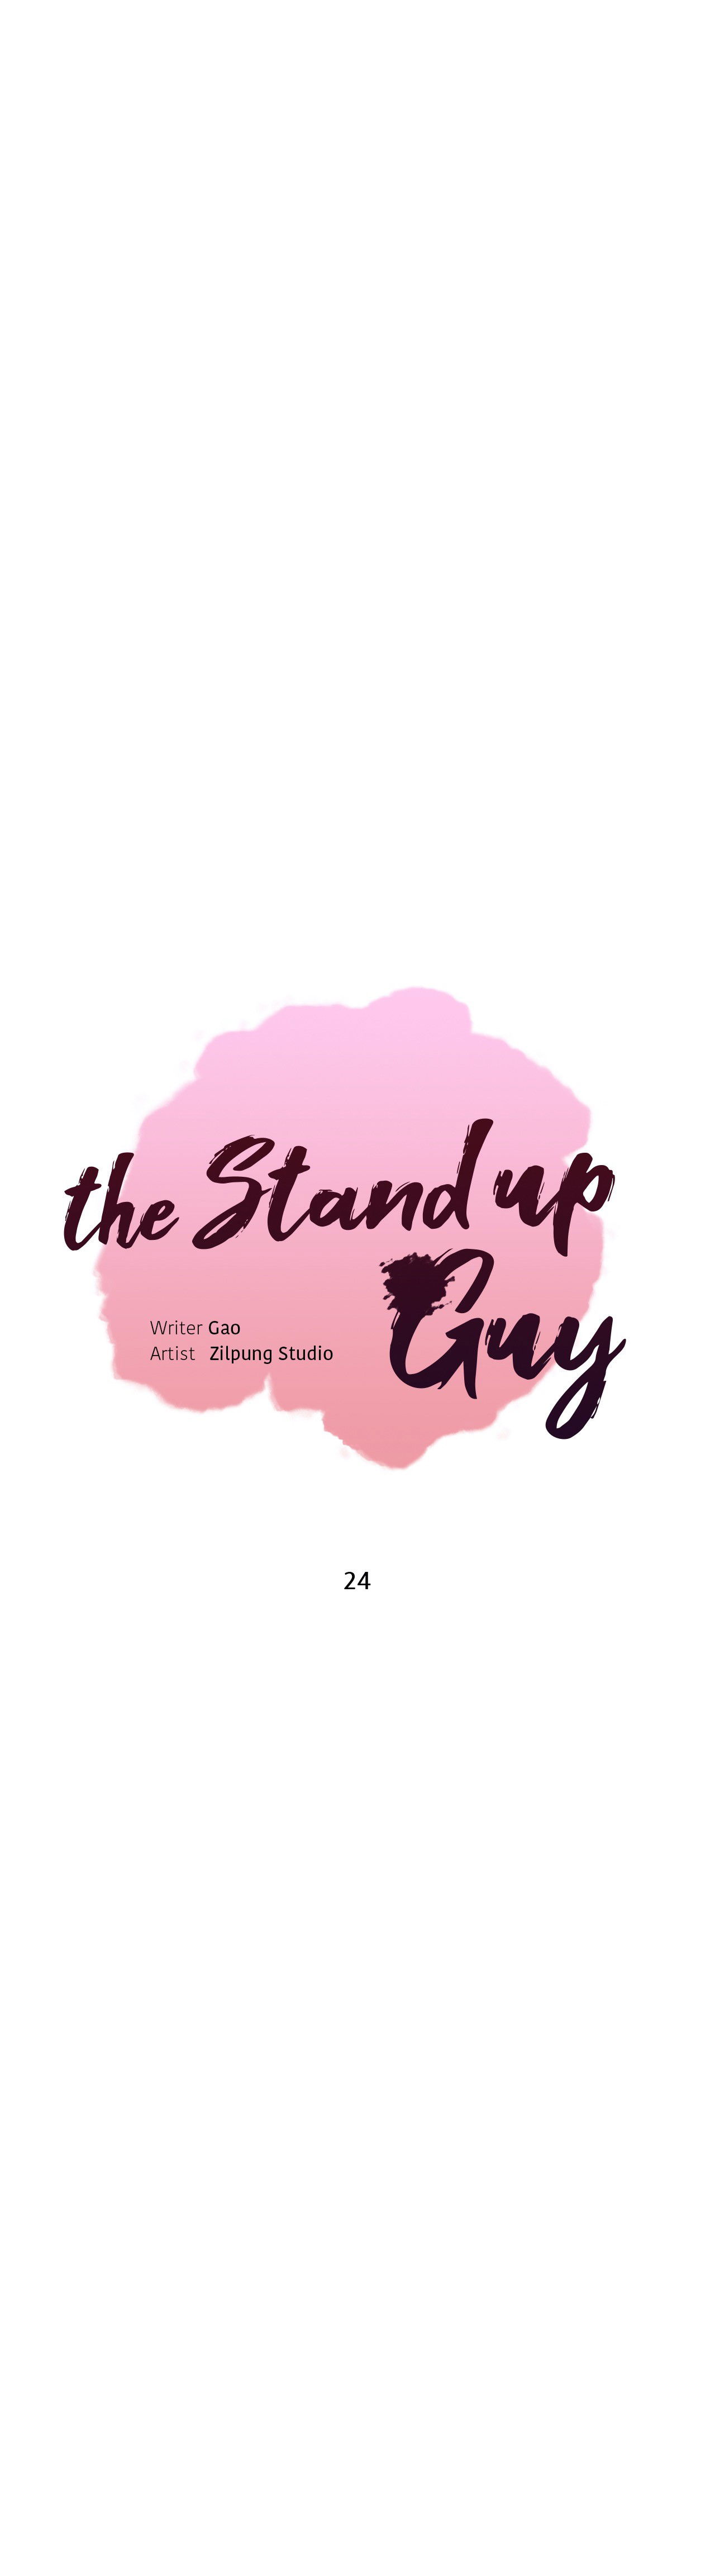 the-stand-up-guy-chap-24-0